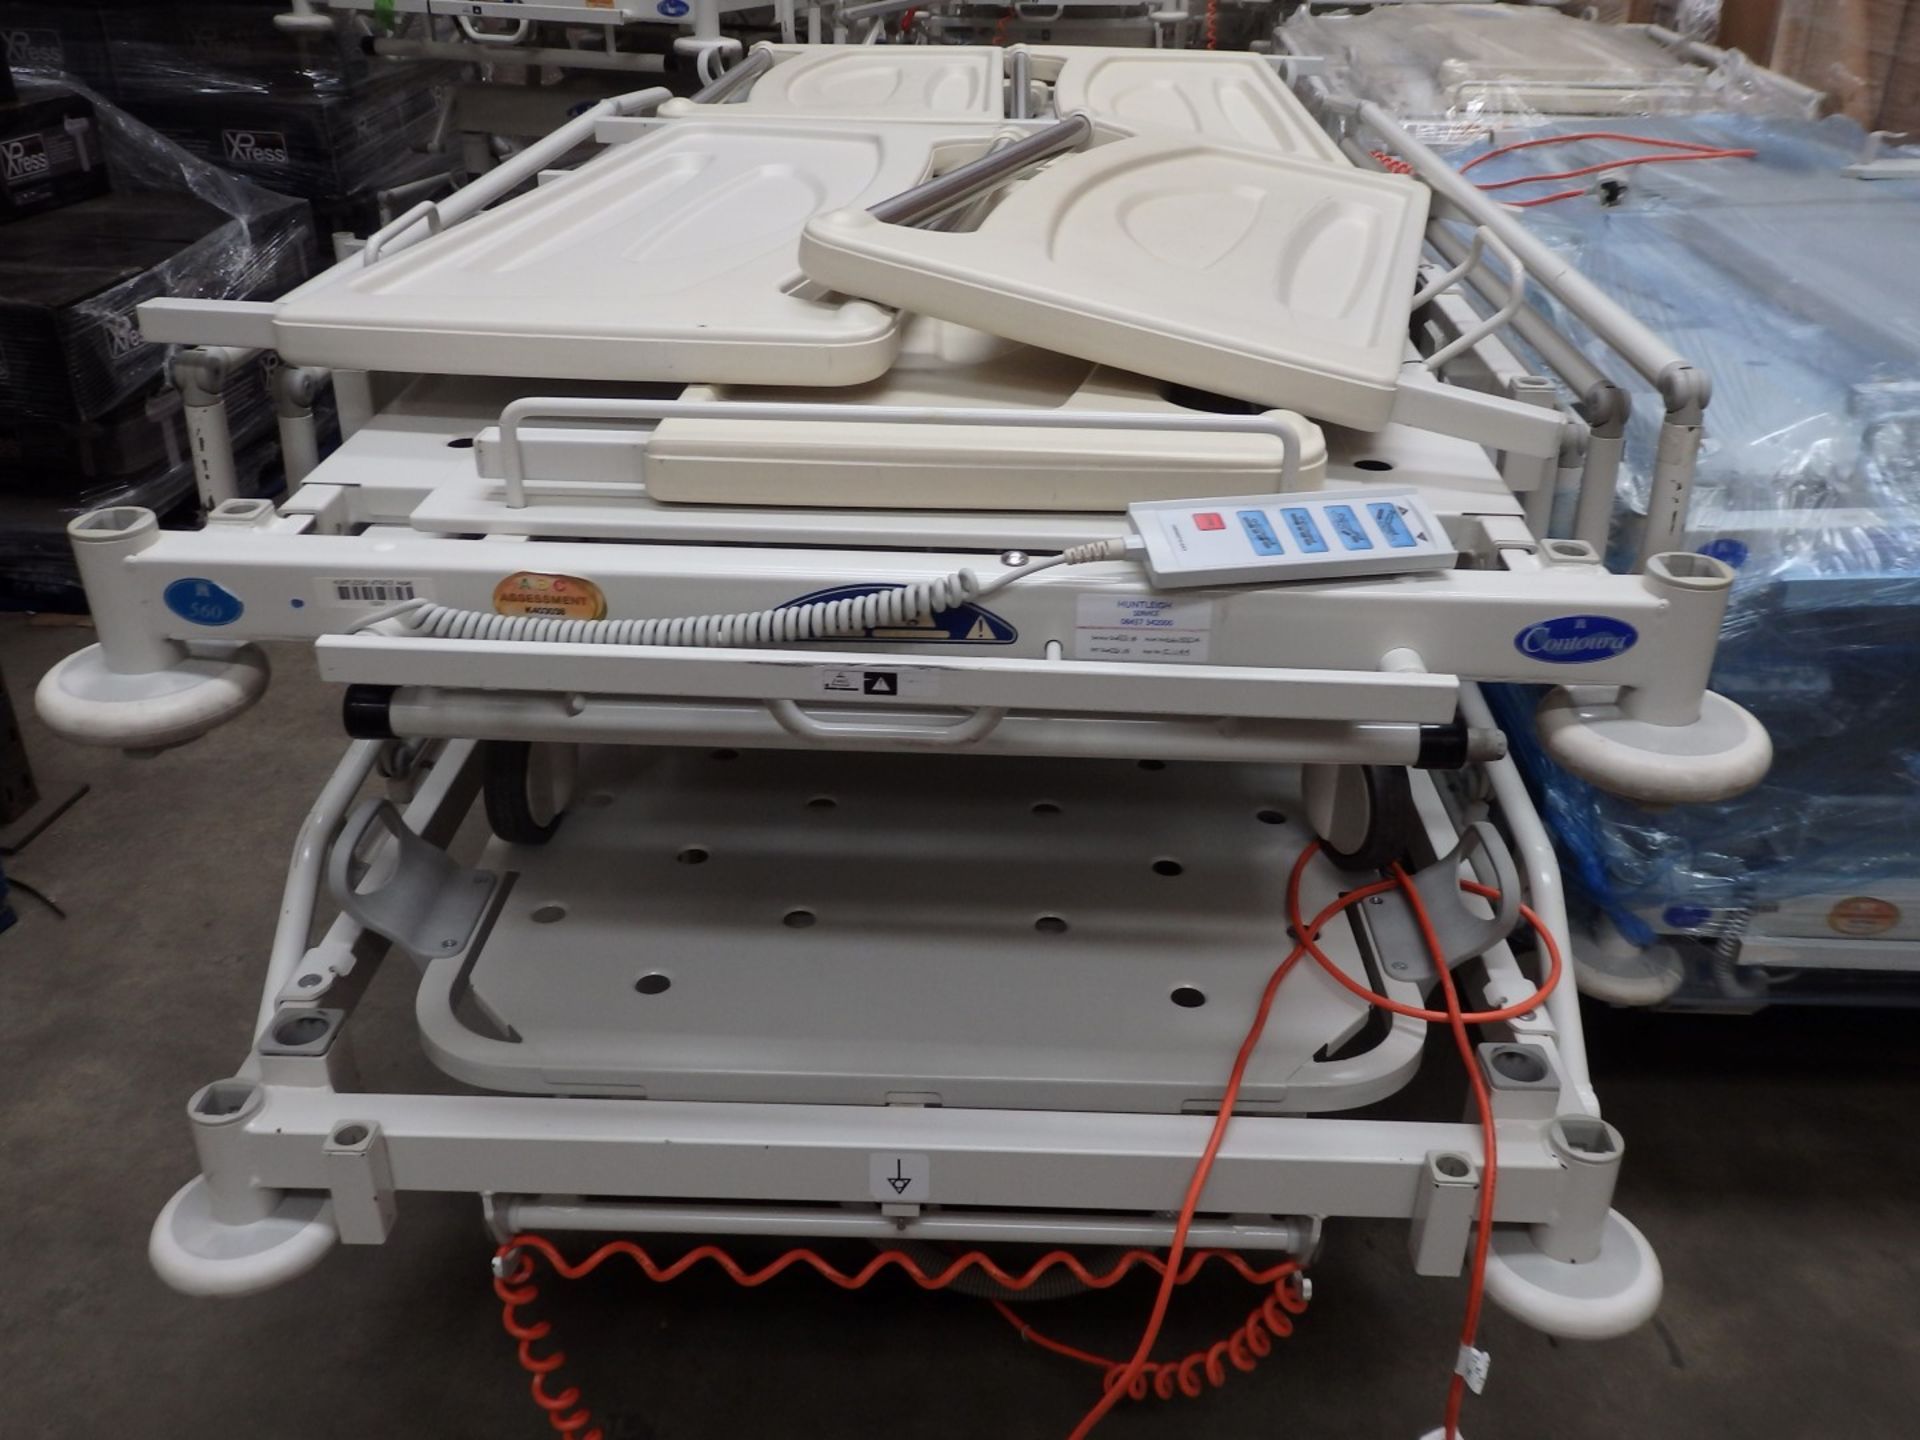 1 x Contoura 560 Huntleigh Electric Hospital Bed - Adult Size - With Side Rails - Four Section - Image 3 of 5